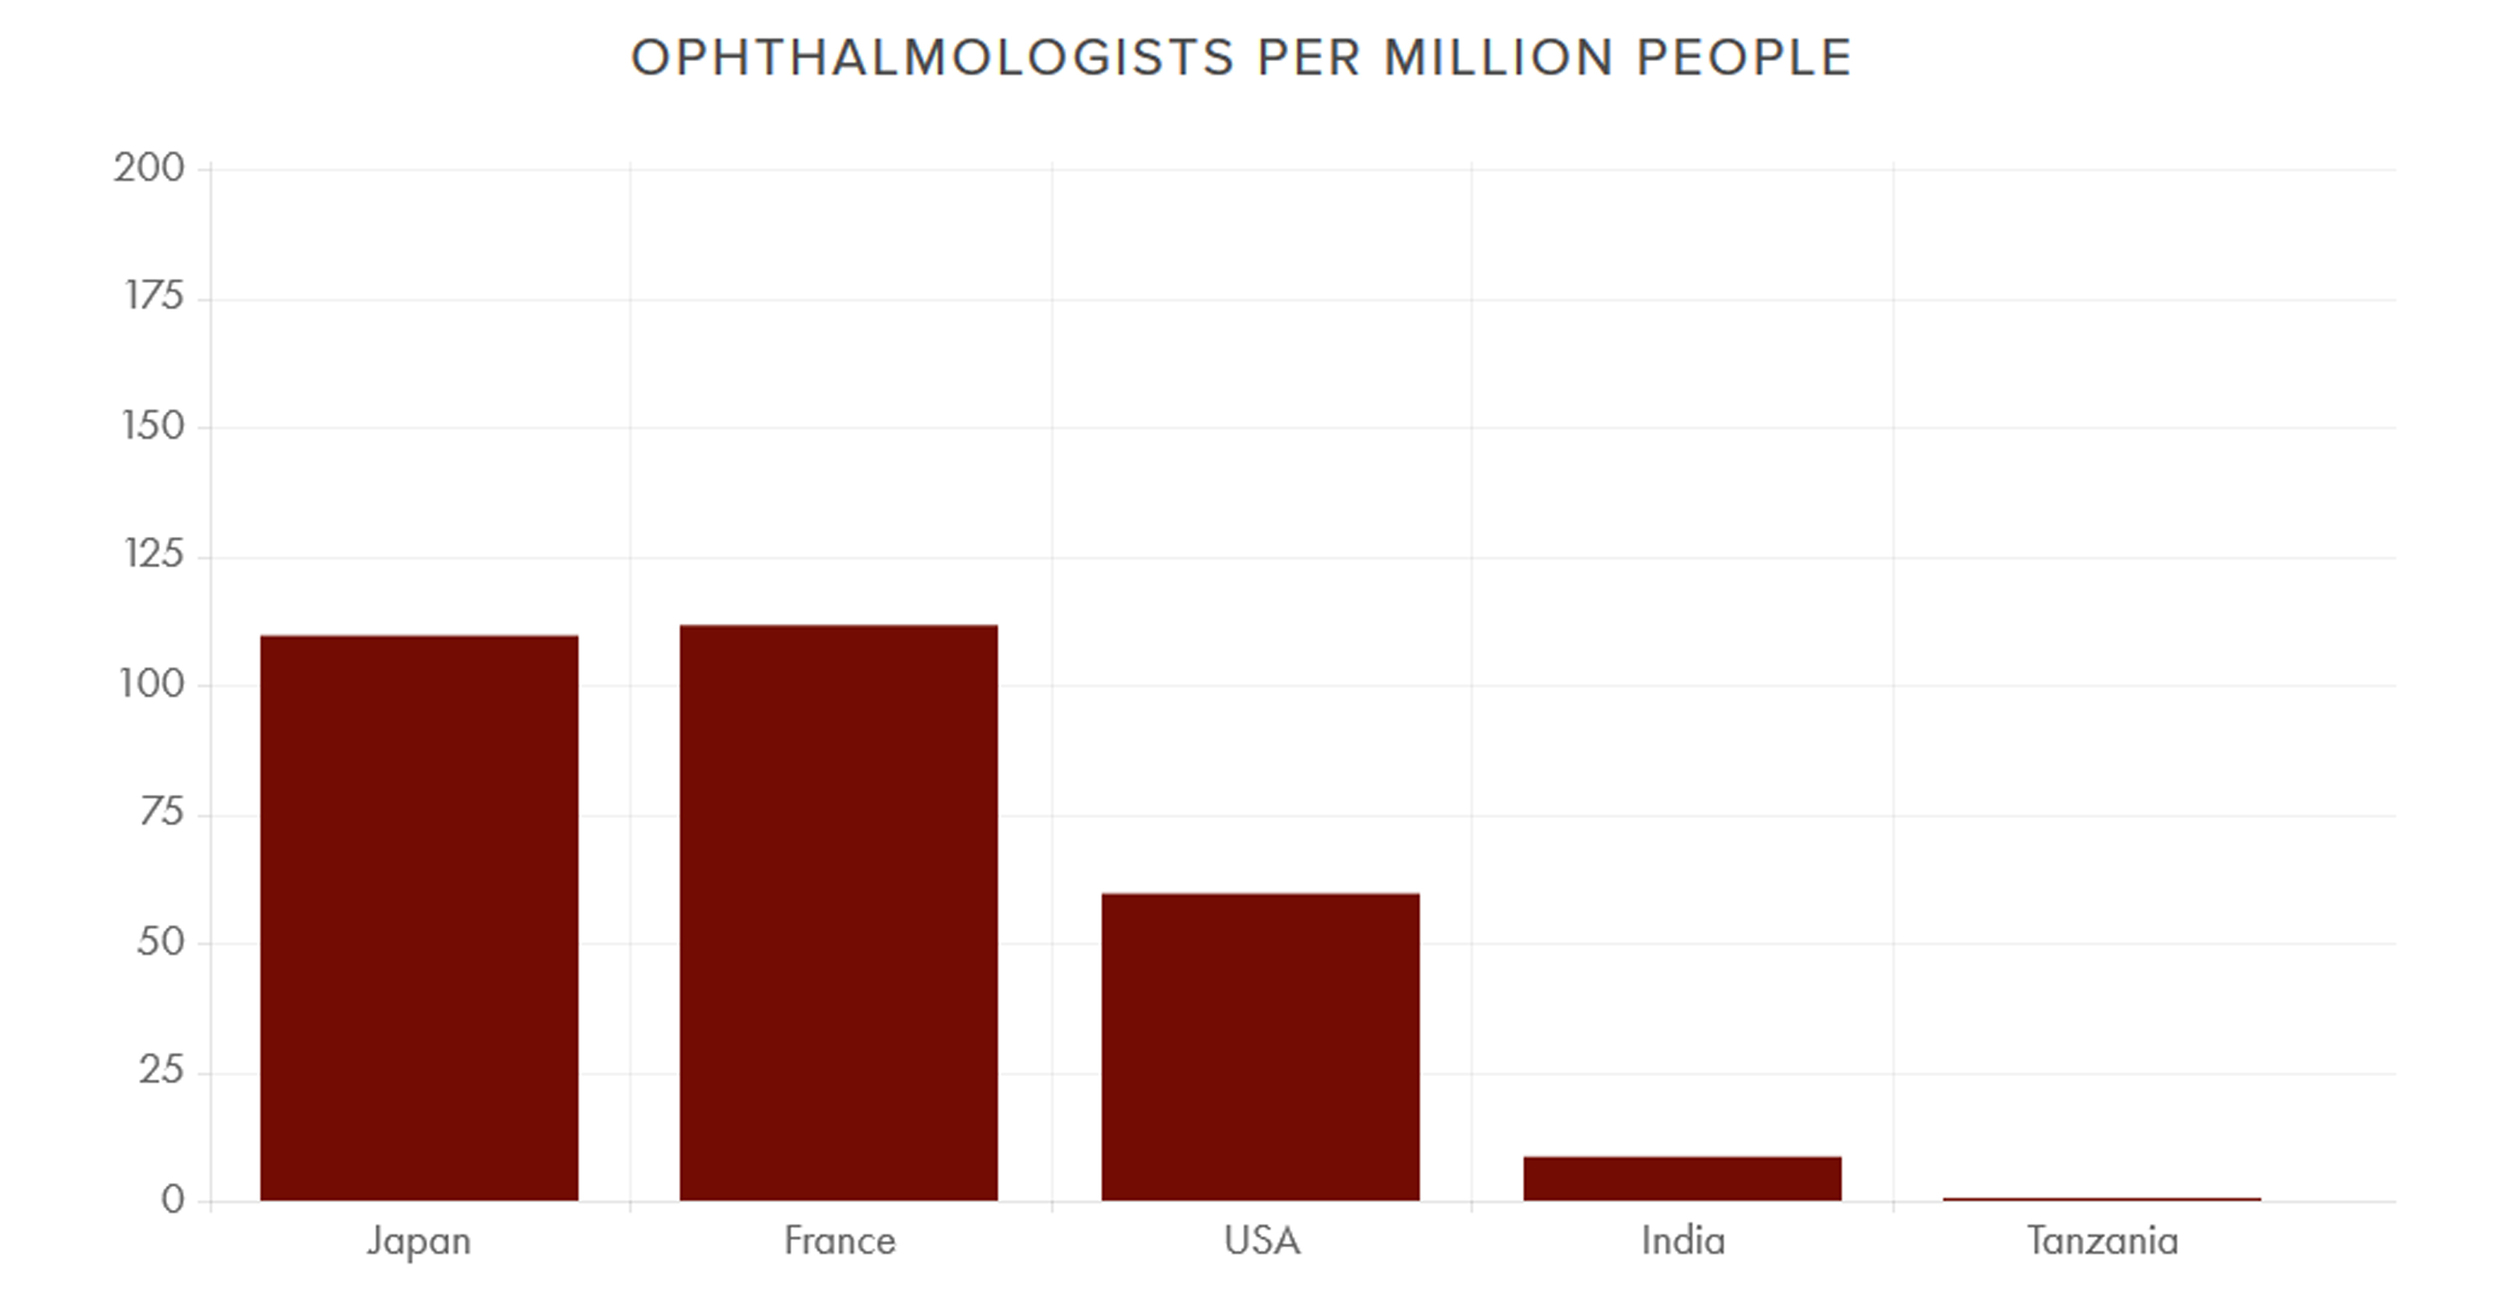   A major factor   in high blindness rates in developing countries is a relative lack of eye surgeons. In rich countries such as Japan, France, and the U.S., the number of ophthalmologists per million people ranges from 60 to over 100.   In India, th